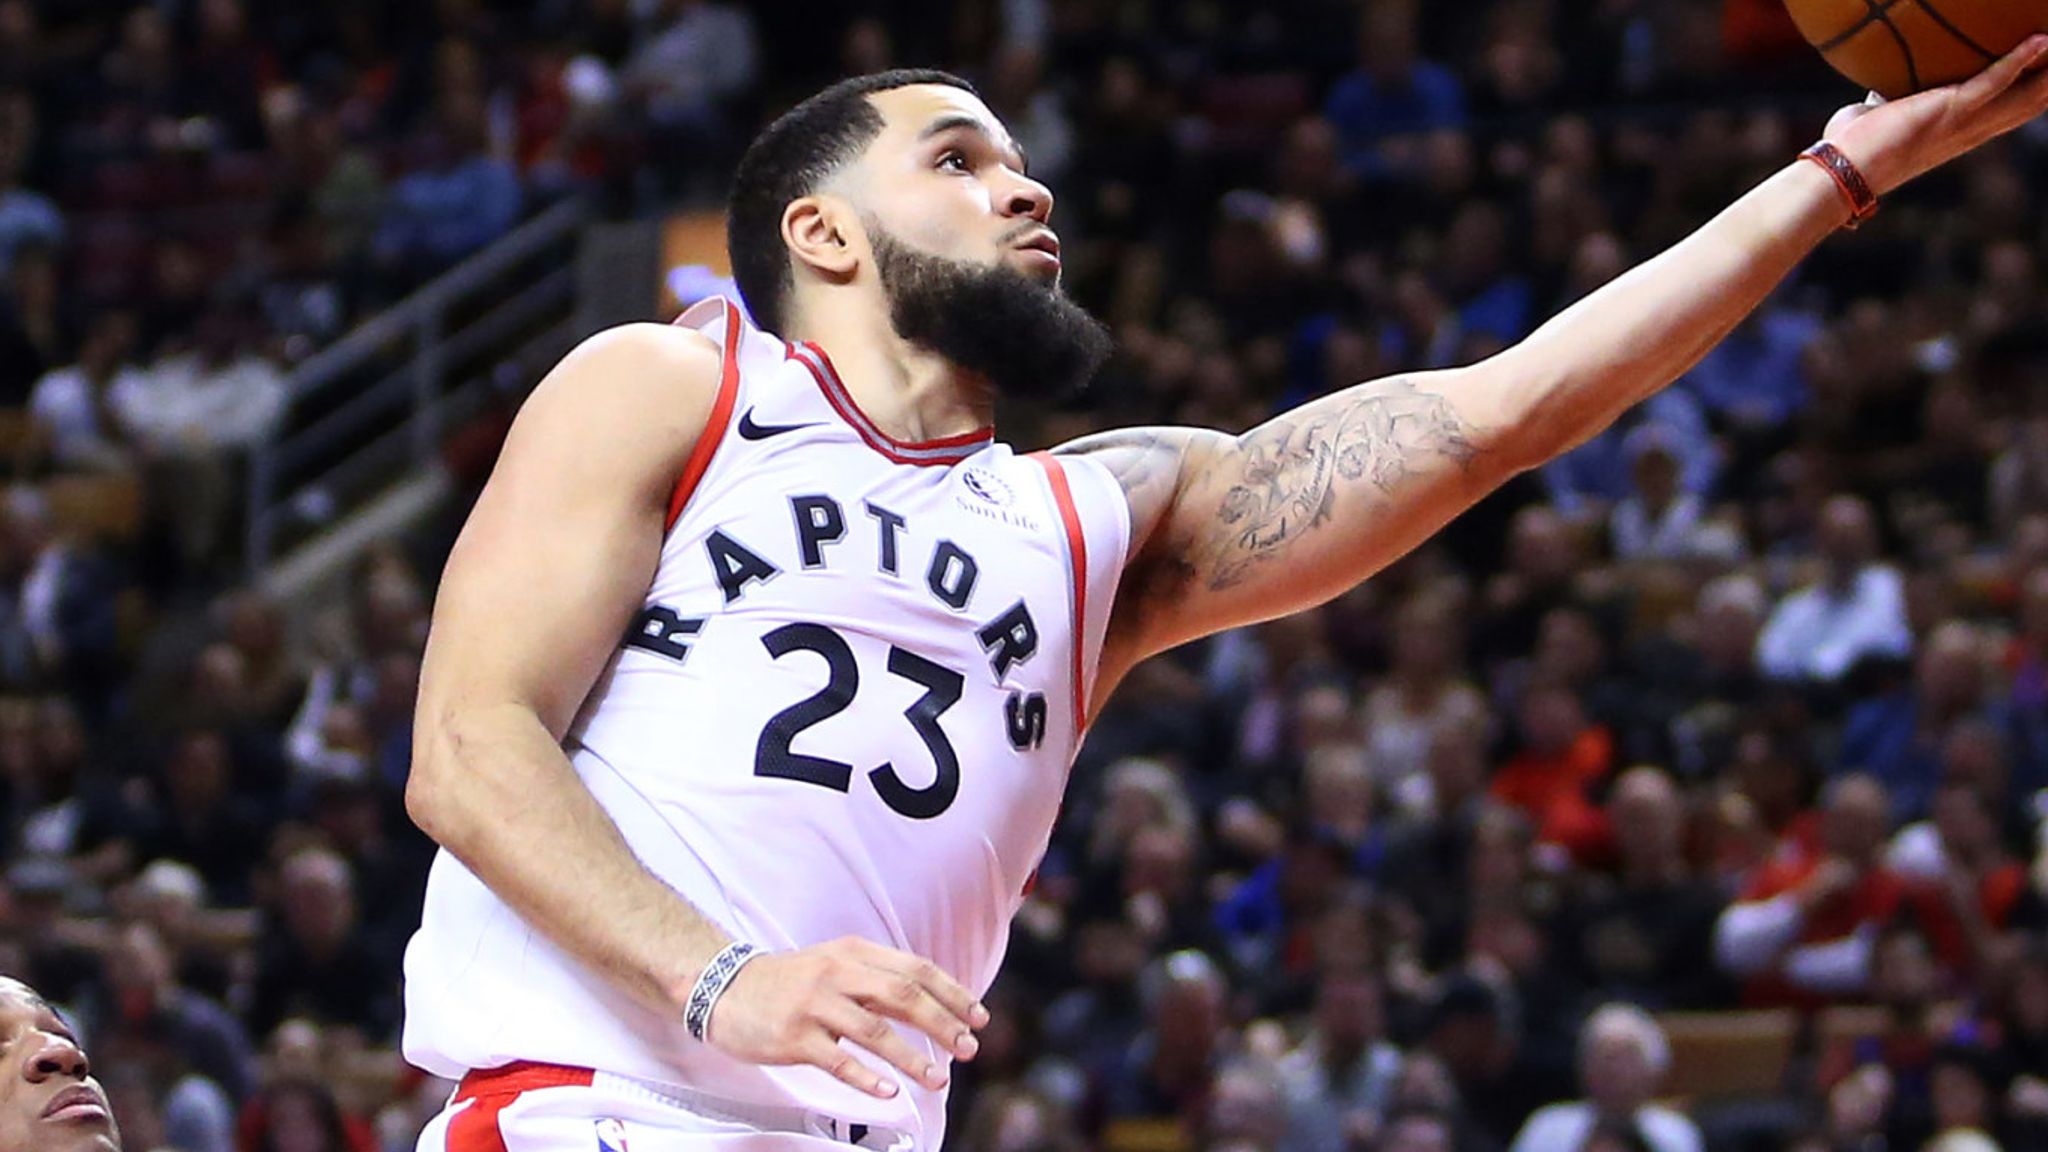 Here's how you can vote for Fred VanVleet to make the NBA All-Star